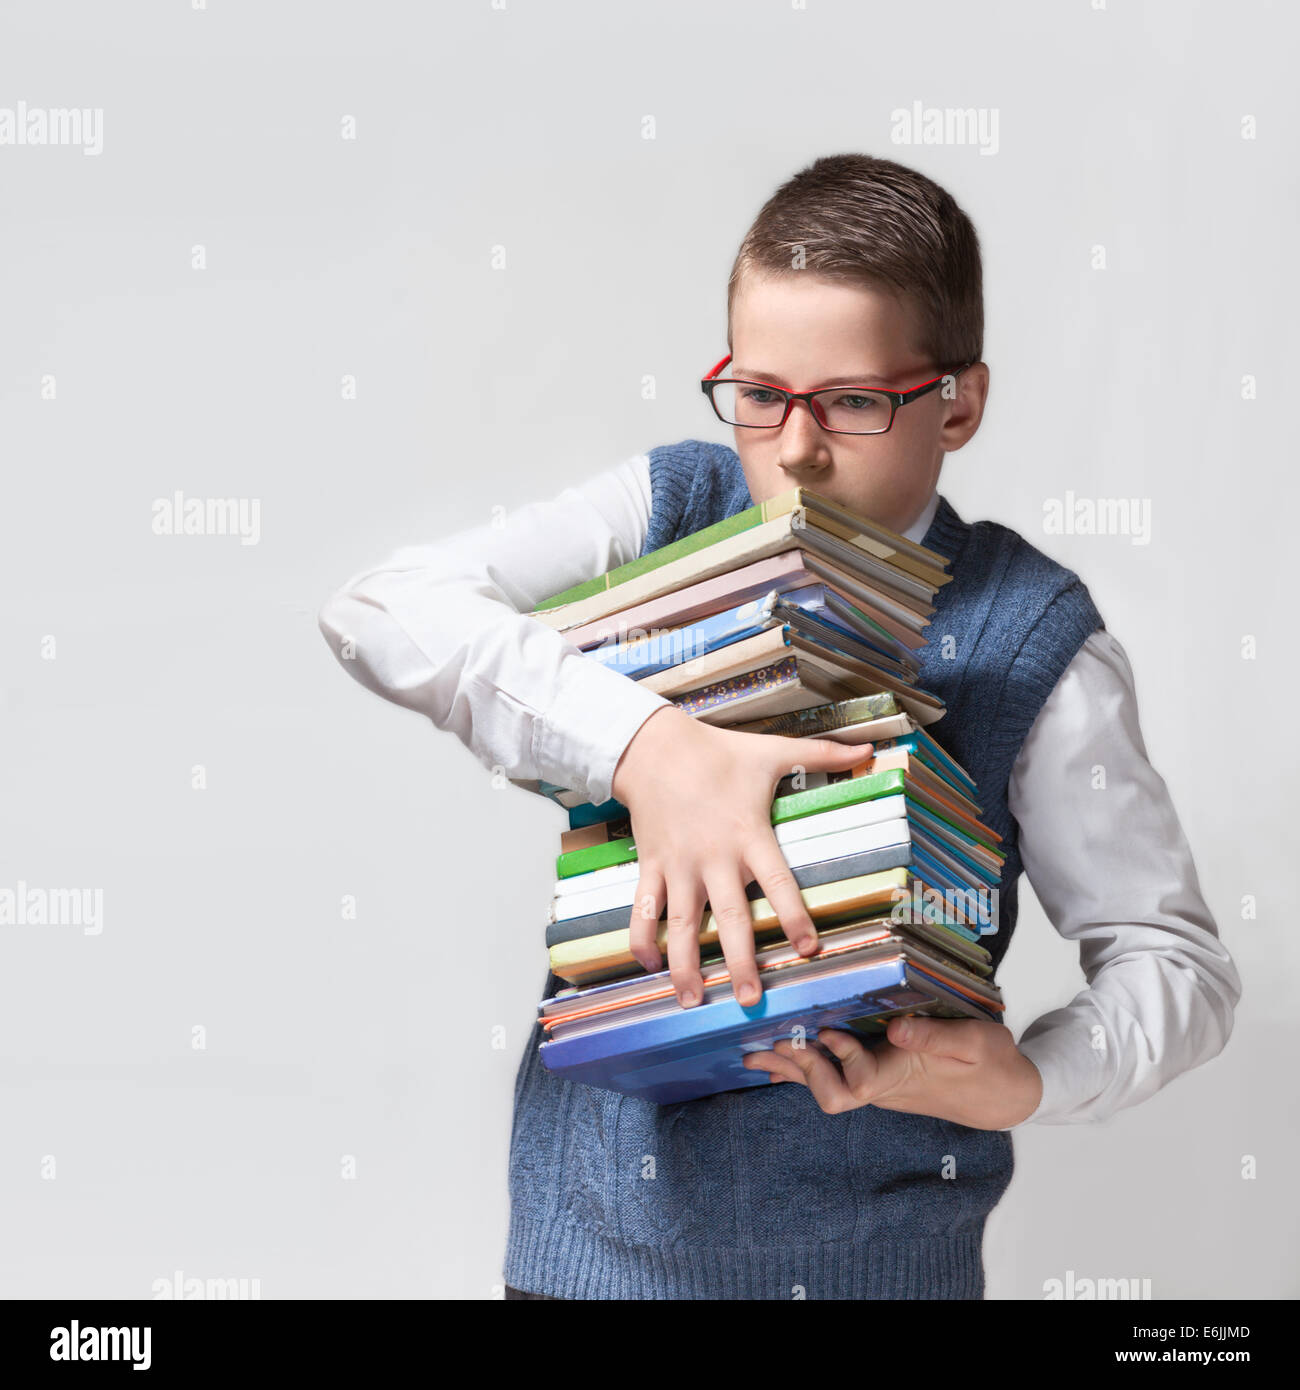 The cute smart schoolboy teenager in a glasses holds a heavy stack of books. Stock Photo